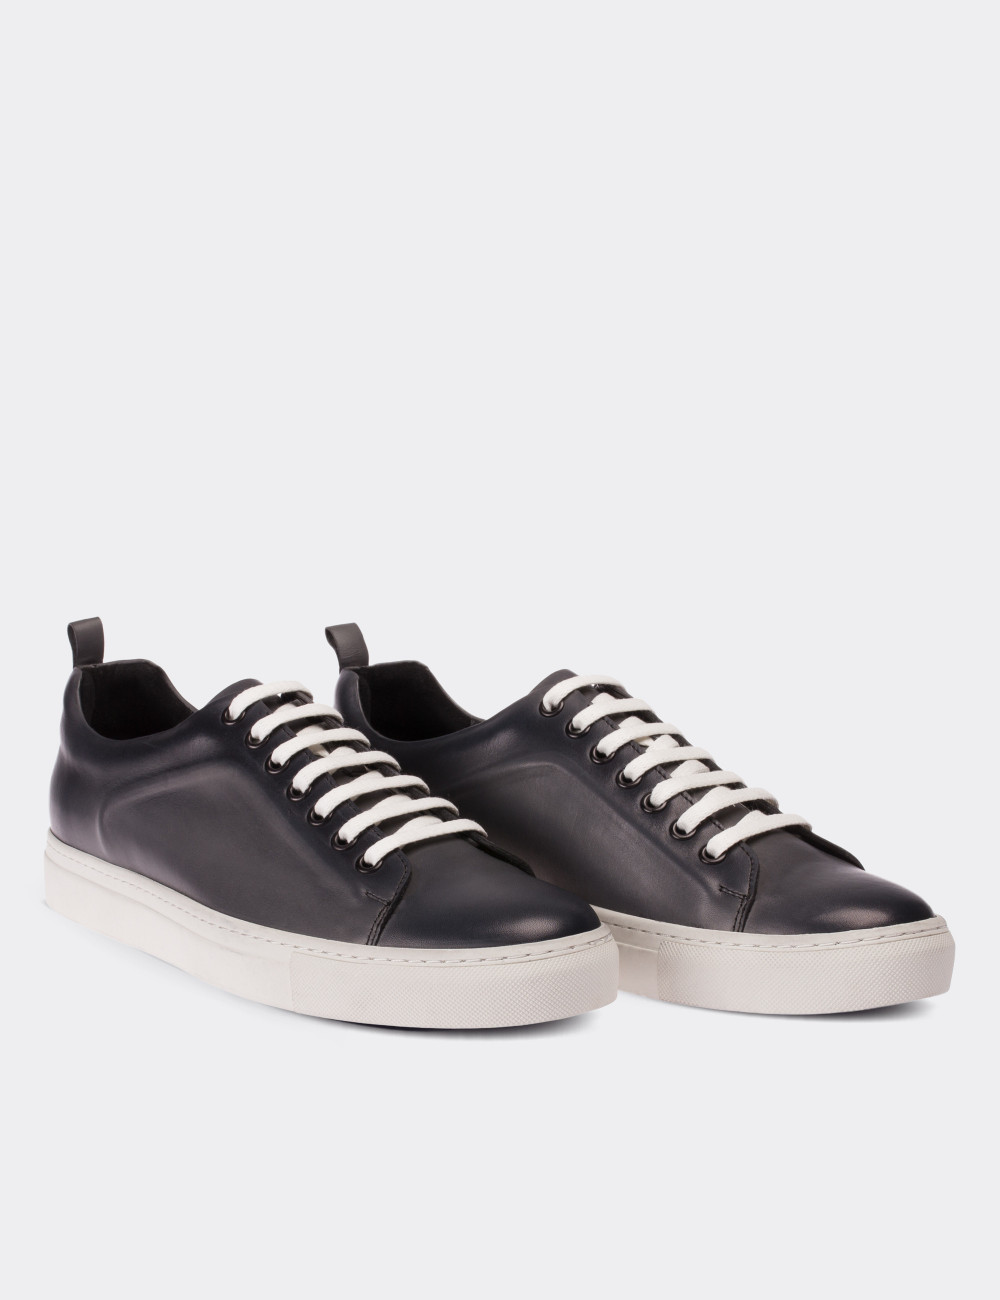 Gray Leather Sneakers 01669MGRIC01 - Deery